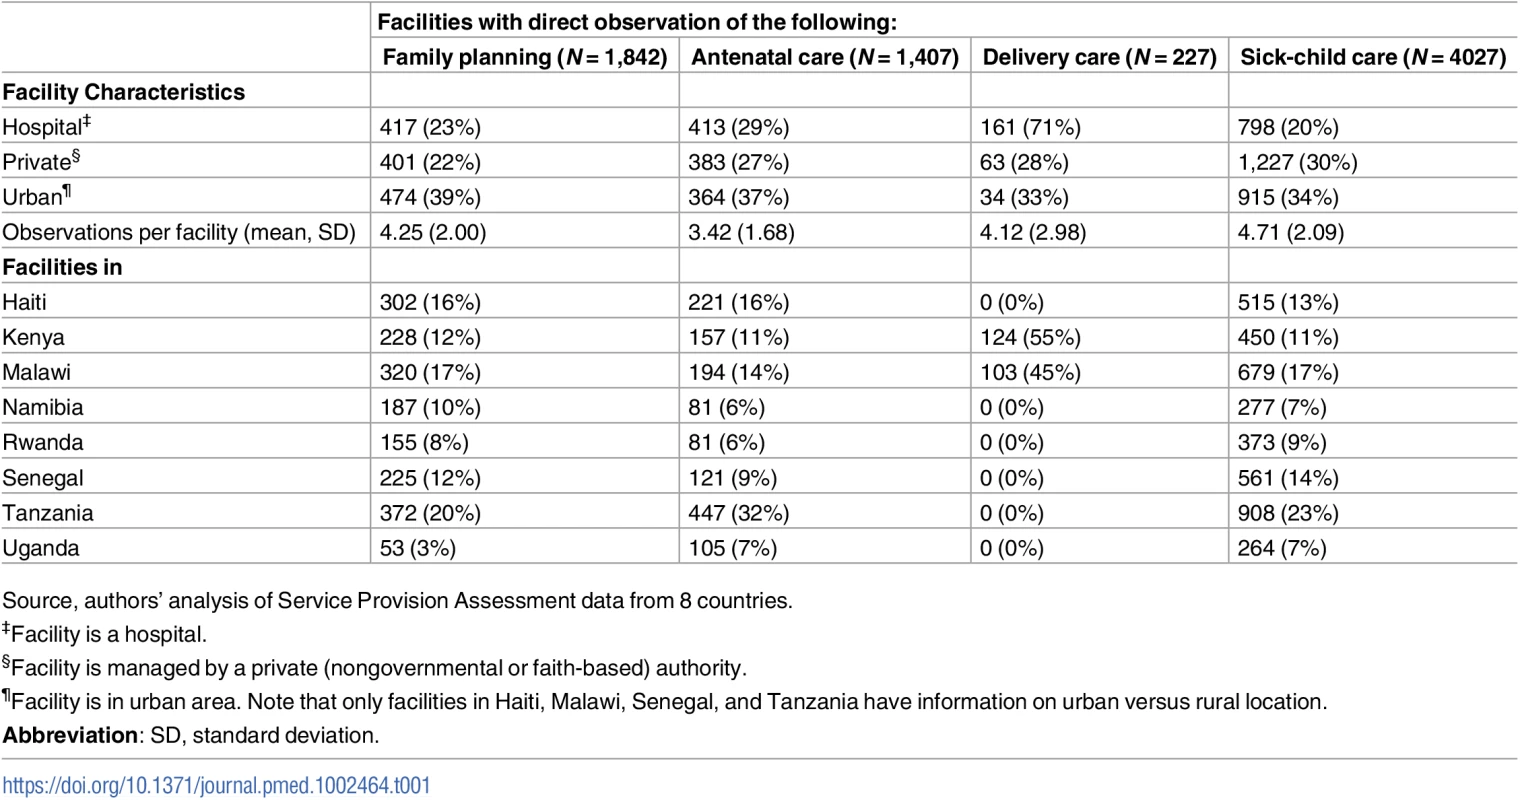 Characteristics of facilities providing family planning, antenatal, sick-child, and delivery care in 8 countries, 2007–2015.